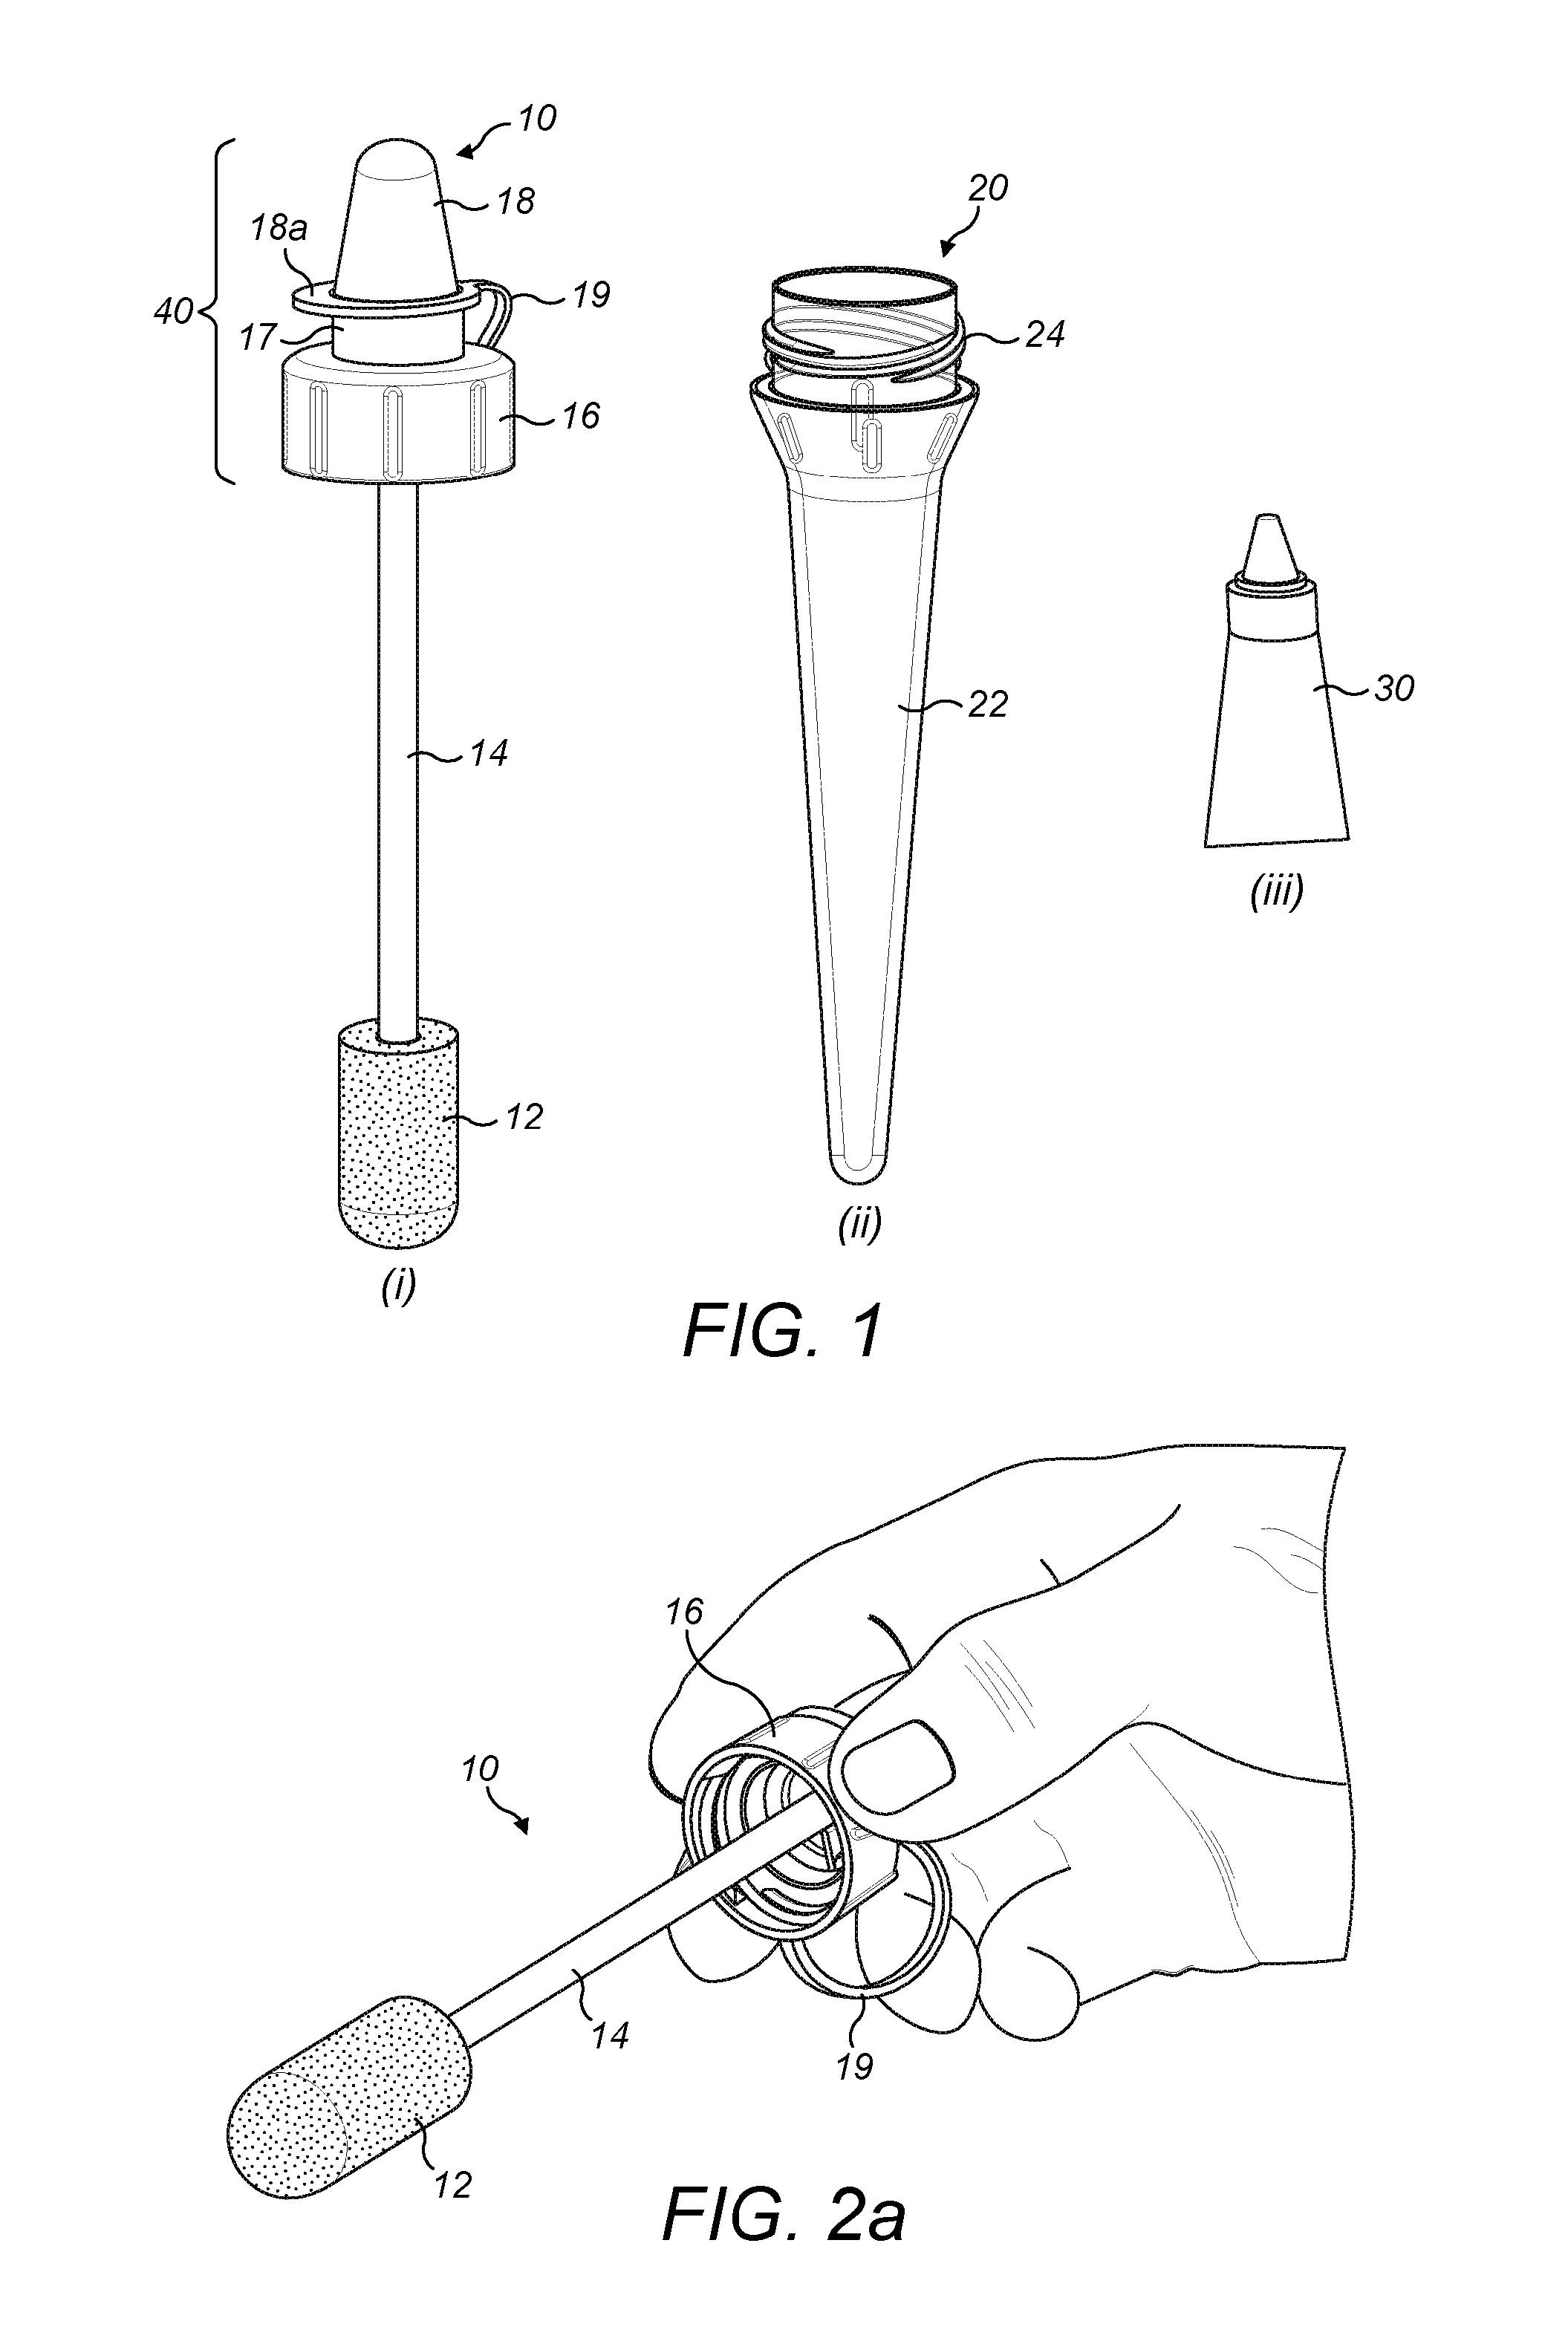 Fluid collection device